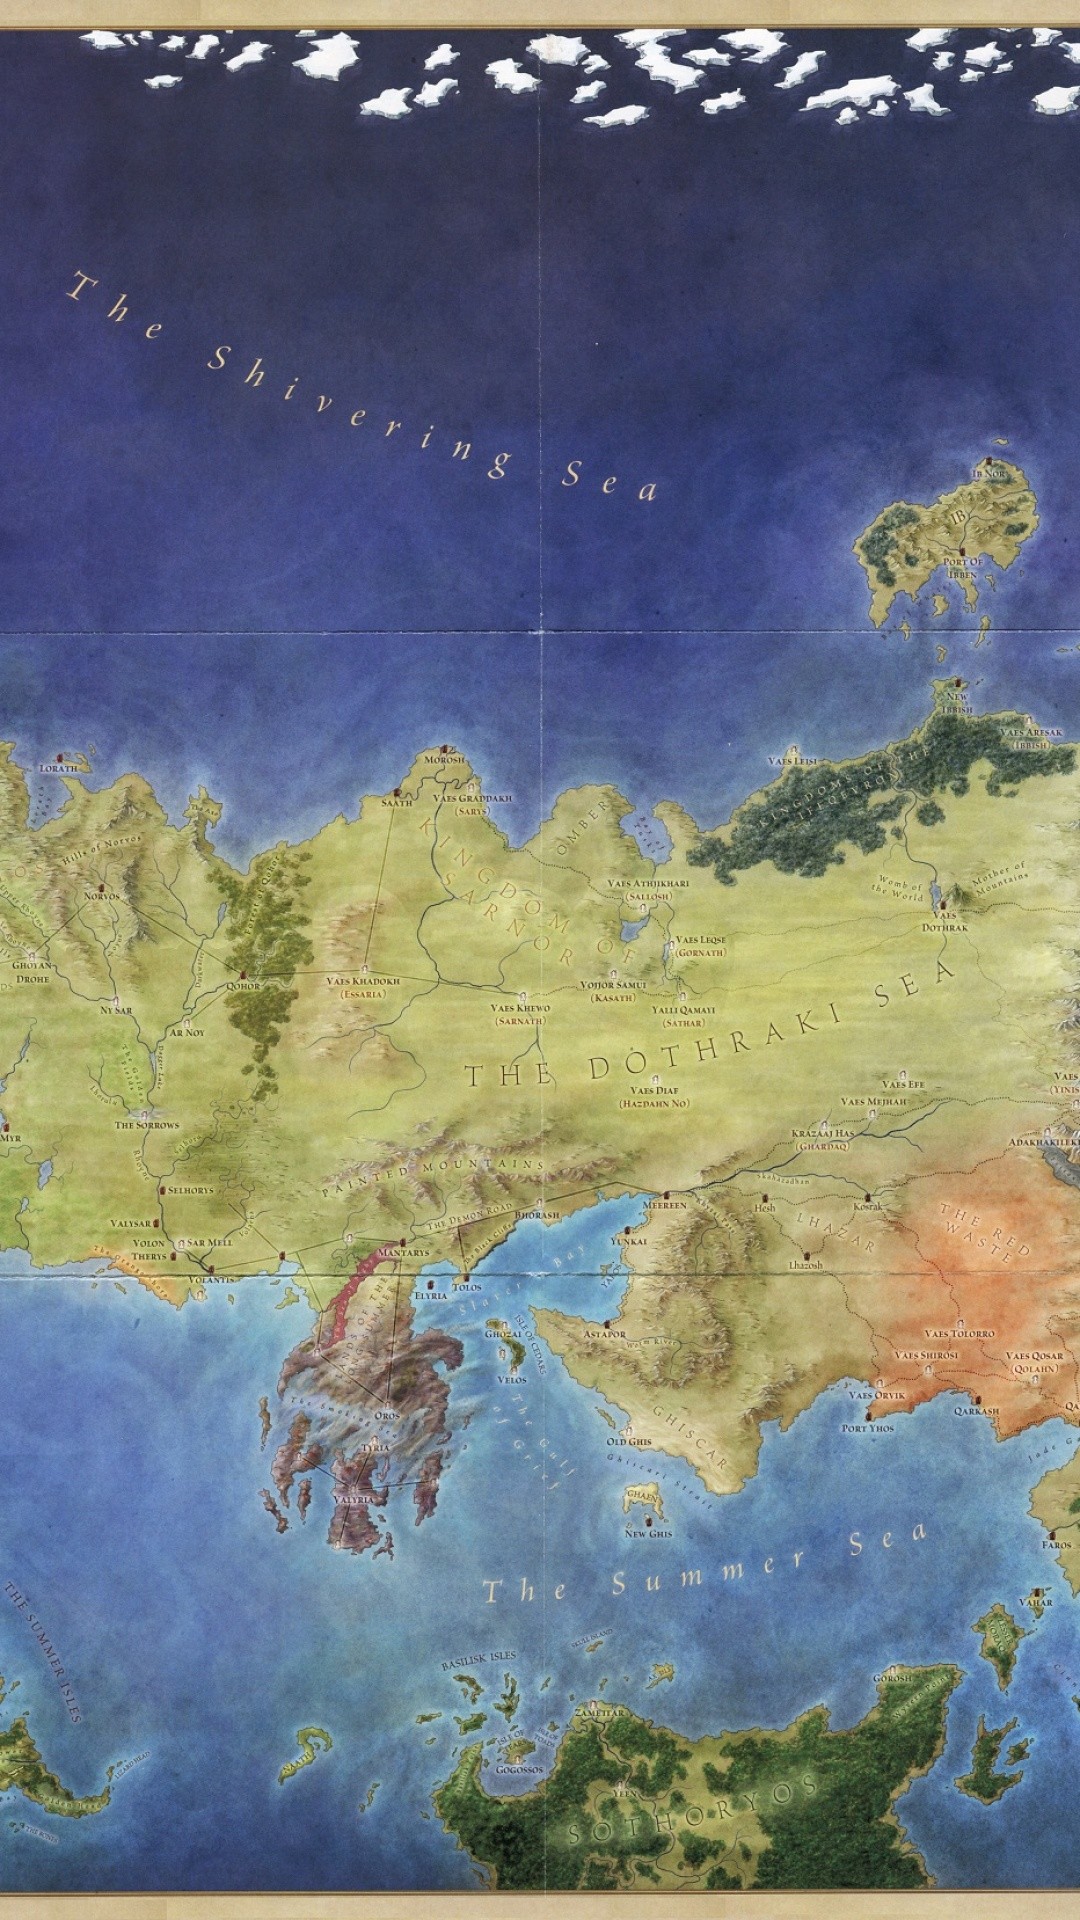 Game Of Thrones Map Wallpaper - Official World Of Ice And Fire Map - HD Wallpaper 